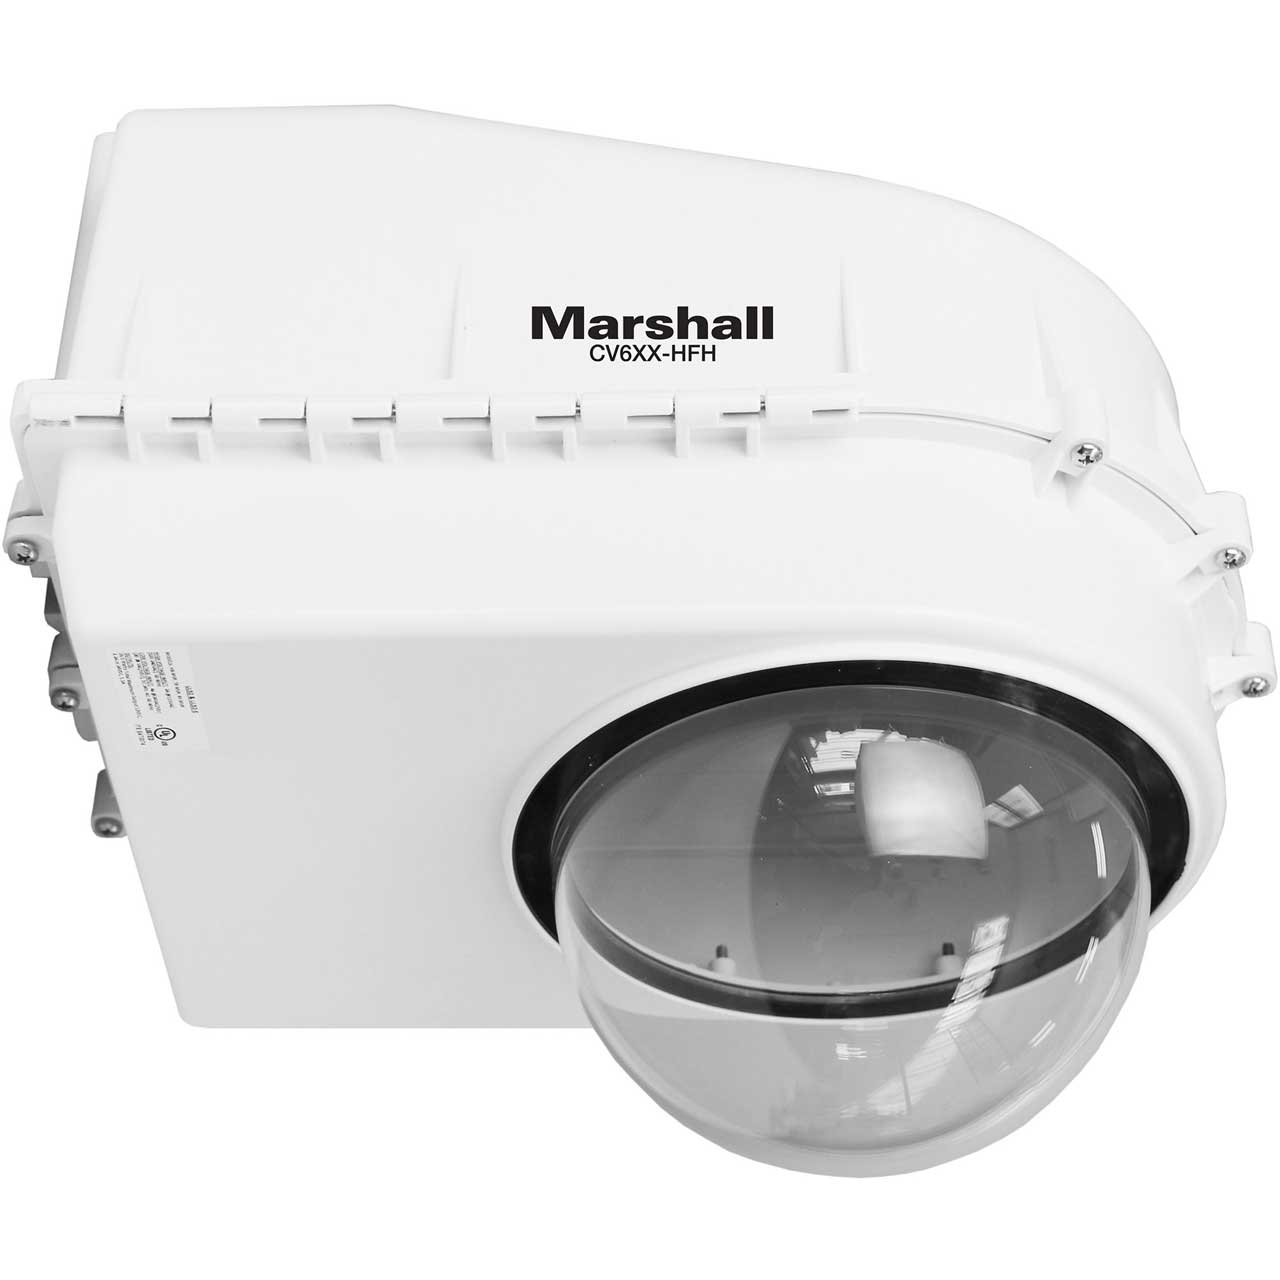 Marshall CV6XX-HFH Compact Weatherproof Dome Housing for PTZ with Fan and Heater  CV6XX-HFH